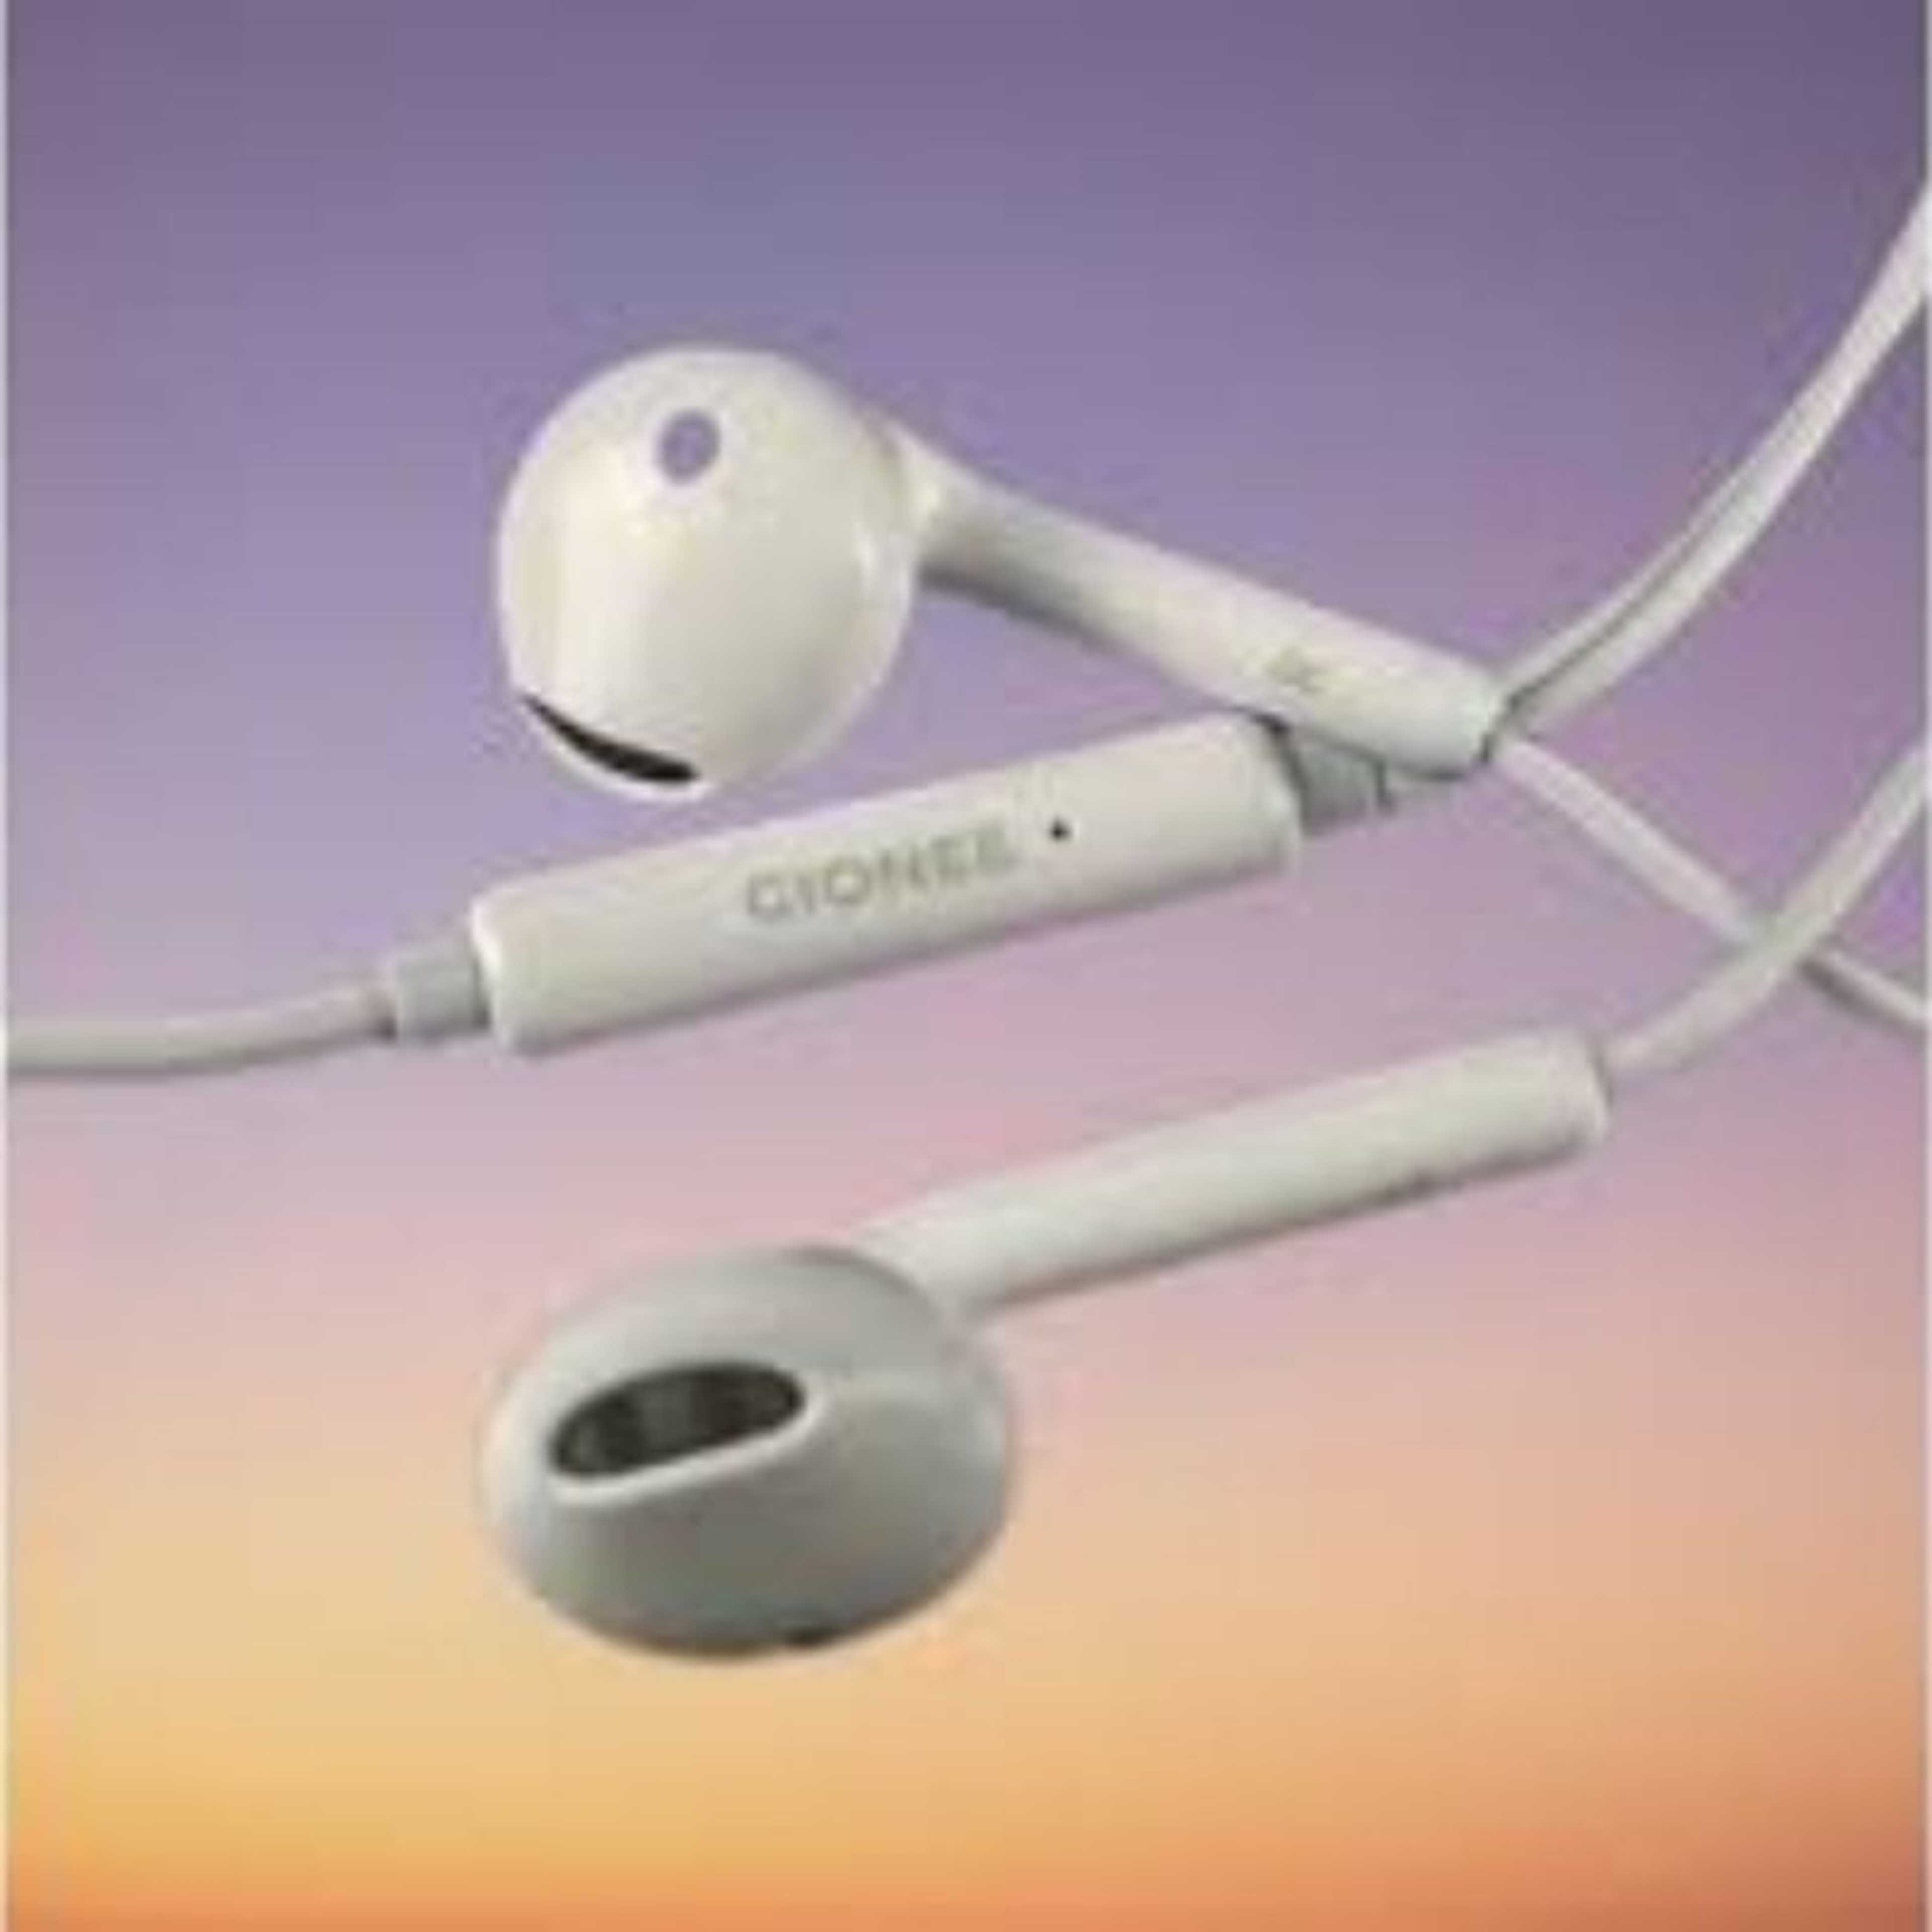 Gionee 100% Original handsfree for Android-100% Gionee earphones connected for all mobiles- Imported Earphone Deep Bass Super Clear Sound For GiONEE 100% Pure Original Imported Handsfree Must Watch upper video to identify the difference between original